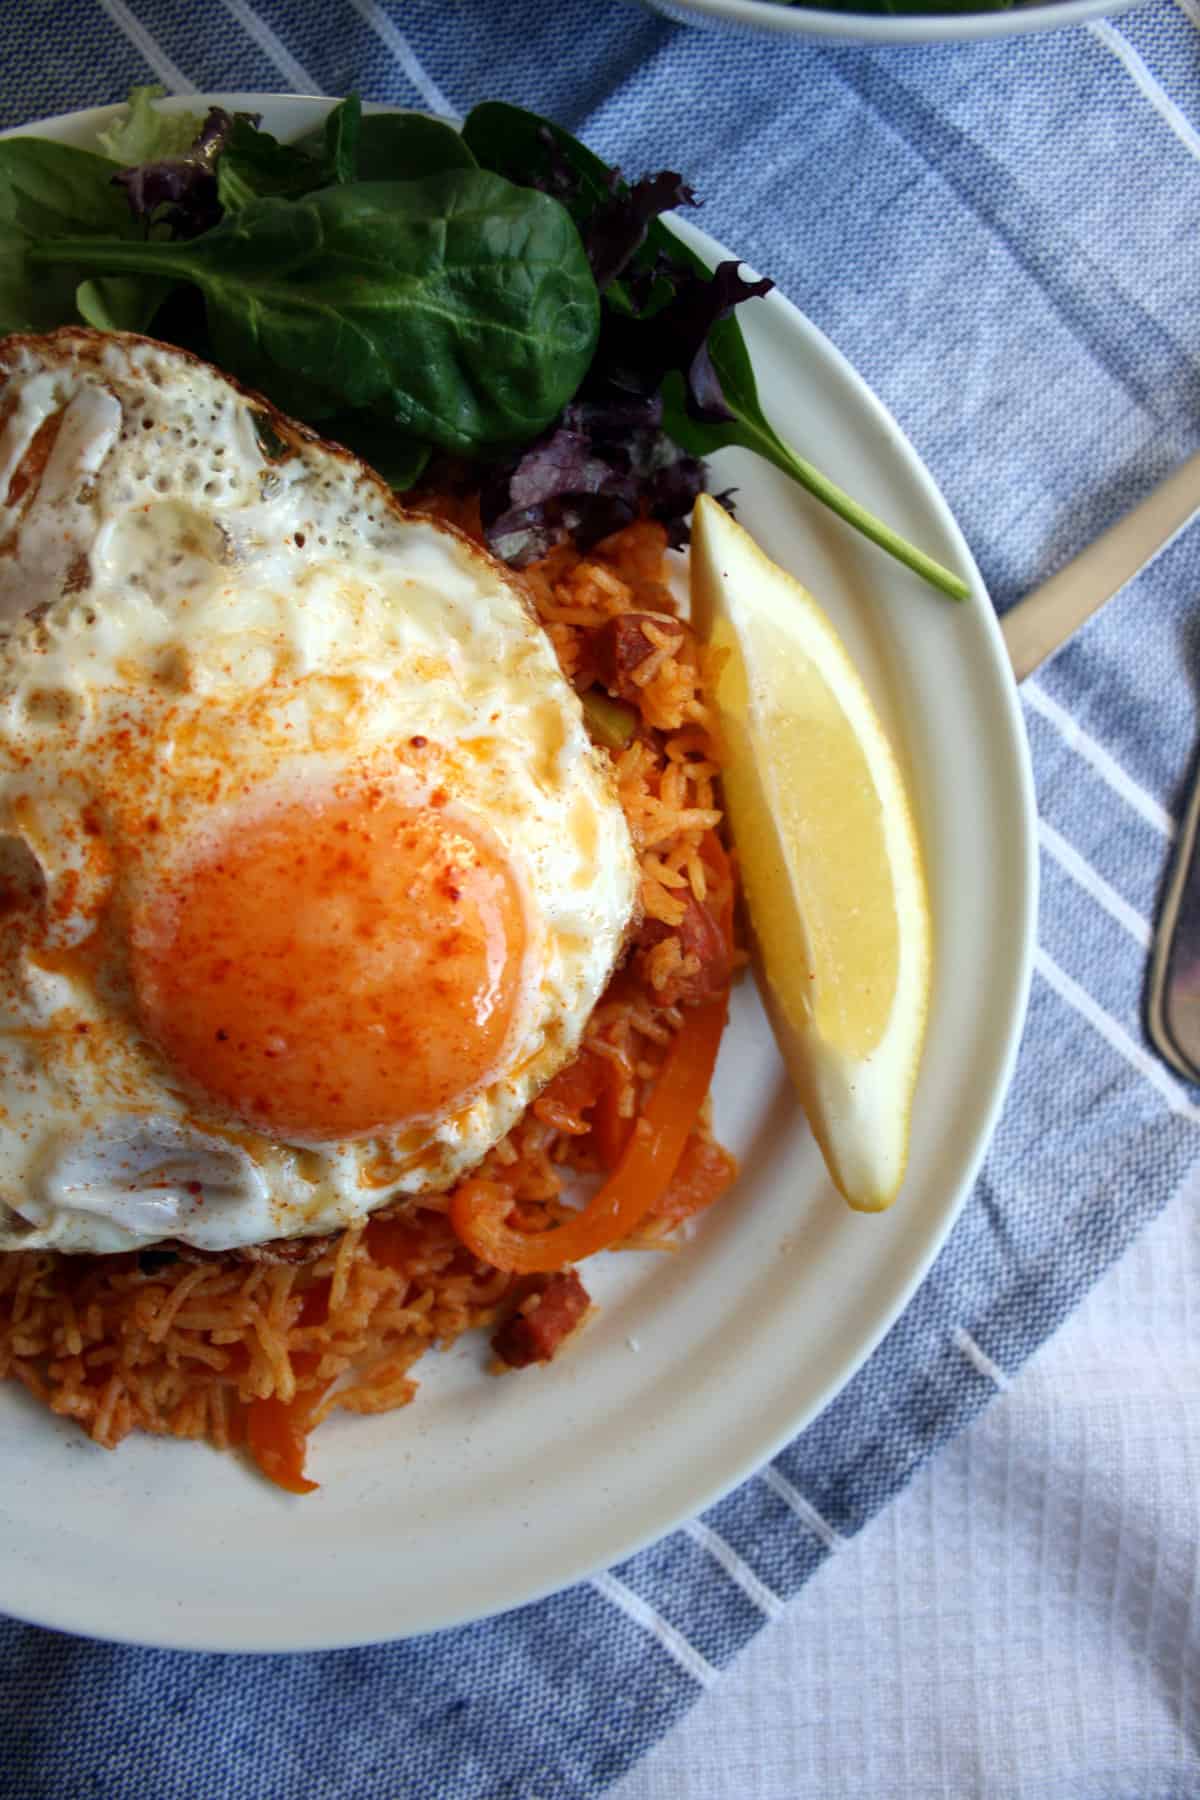 A plate of paella rice and egg on top with salad and a lemon wedge. 